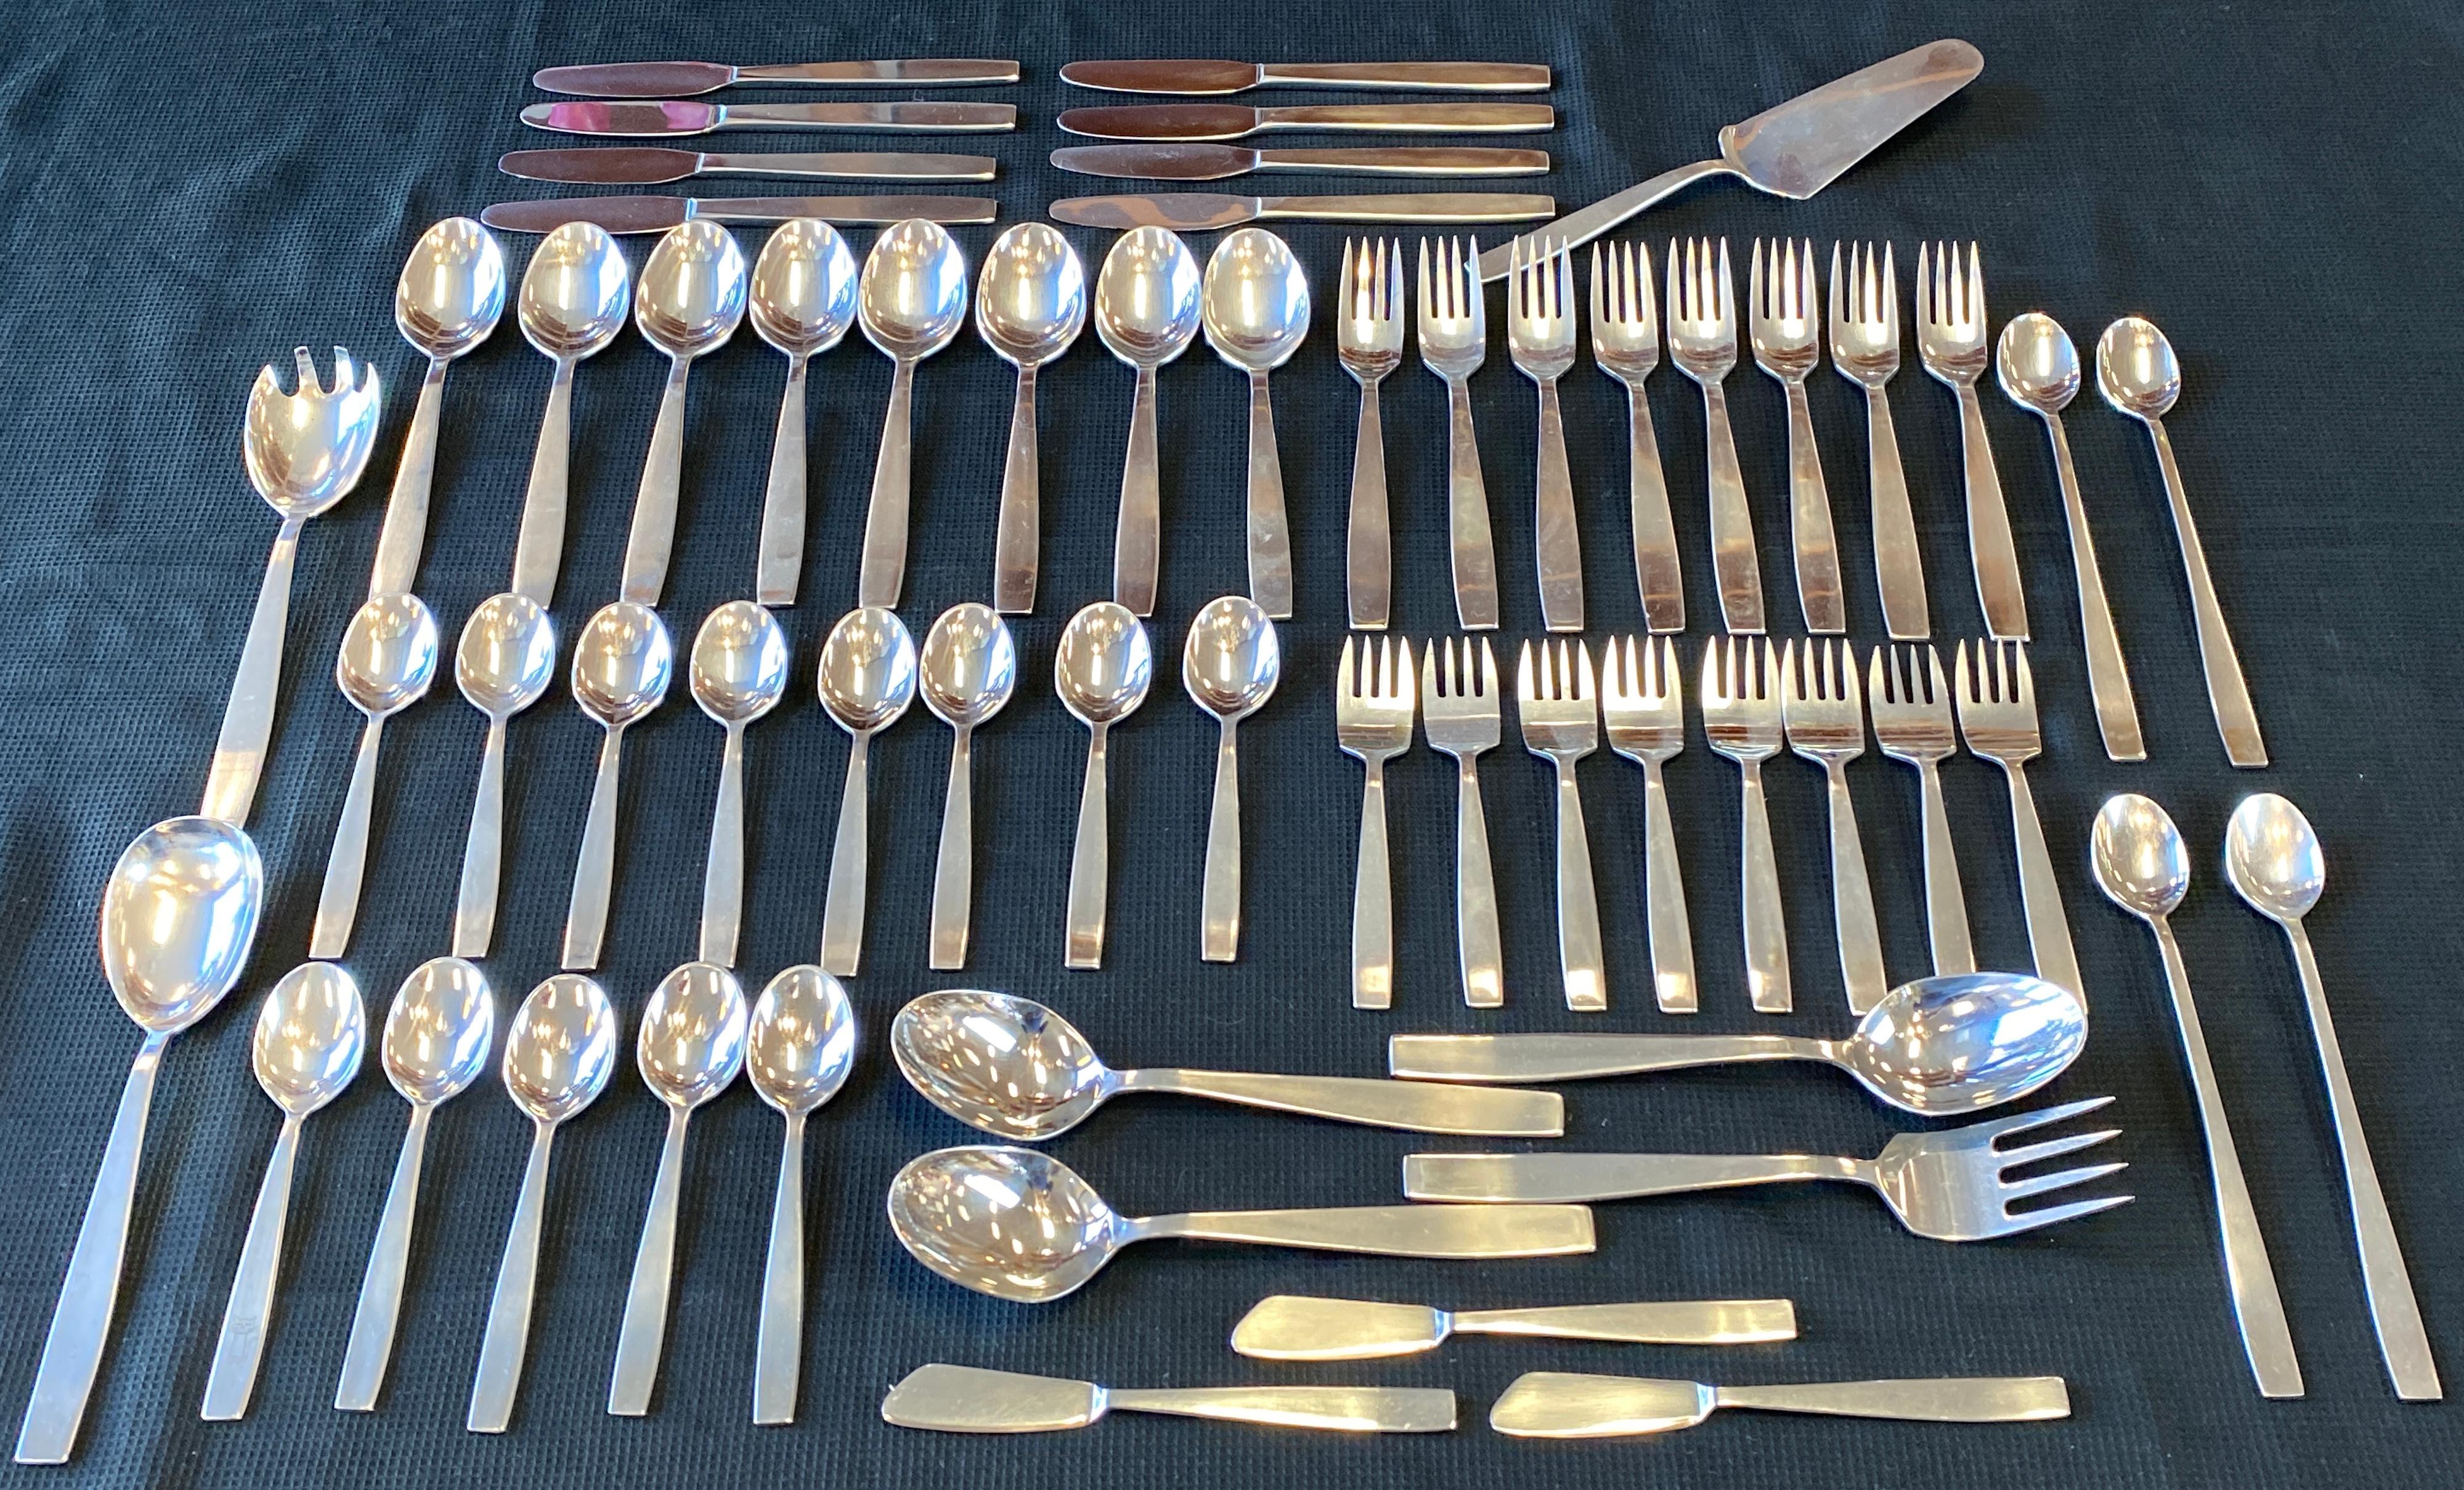 Offered here is a 59 piece set of “Vienna Modern” flatware Design by Helmut Adler for Amboss Austria
8 place settings, plus serving spoon, serving fork, salad tongs, cake server, 3 butter knives and 4 ice tea spoons

8 soup spoons, 7 1/2 inches